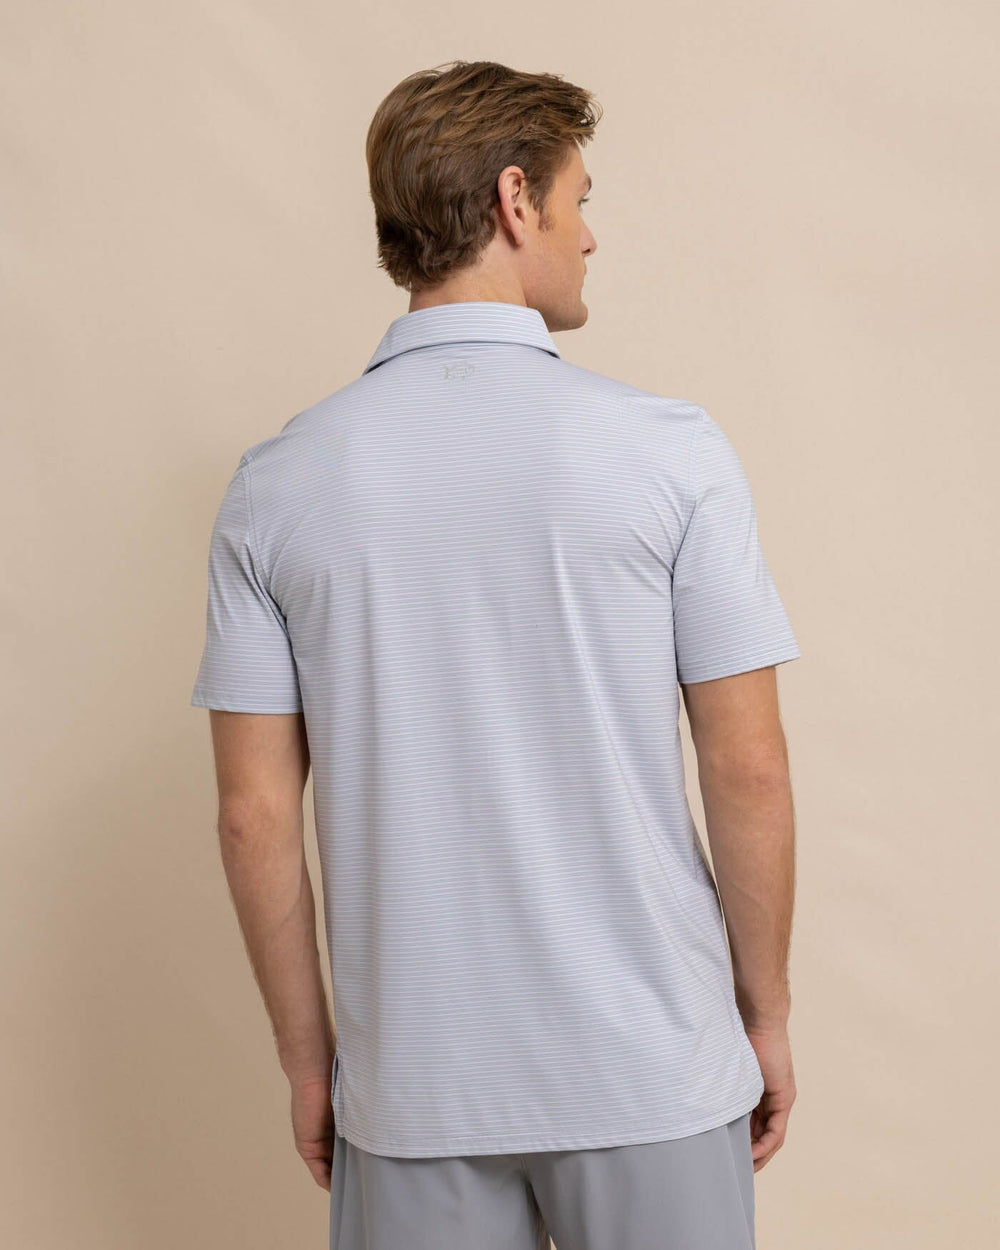 The back view of the Southern Tide brrr-eeze Baytop Stripe Performance Polo by Southern Tide - Platinum Grey